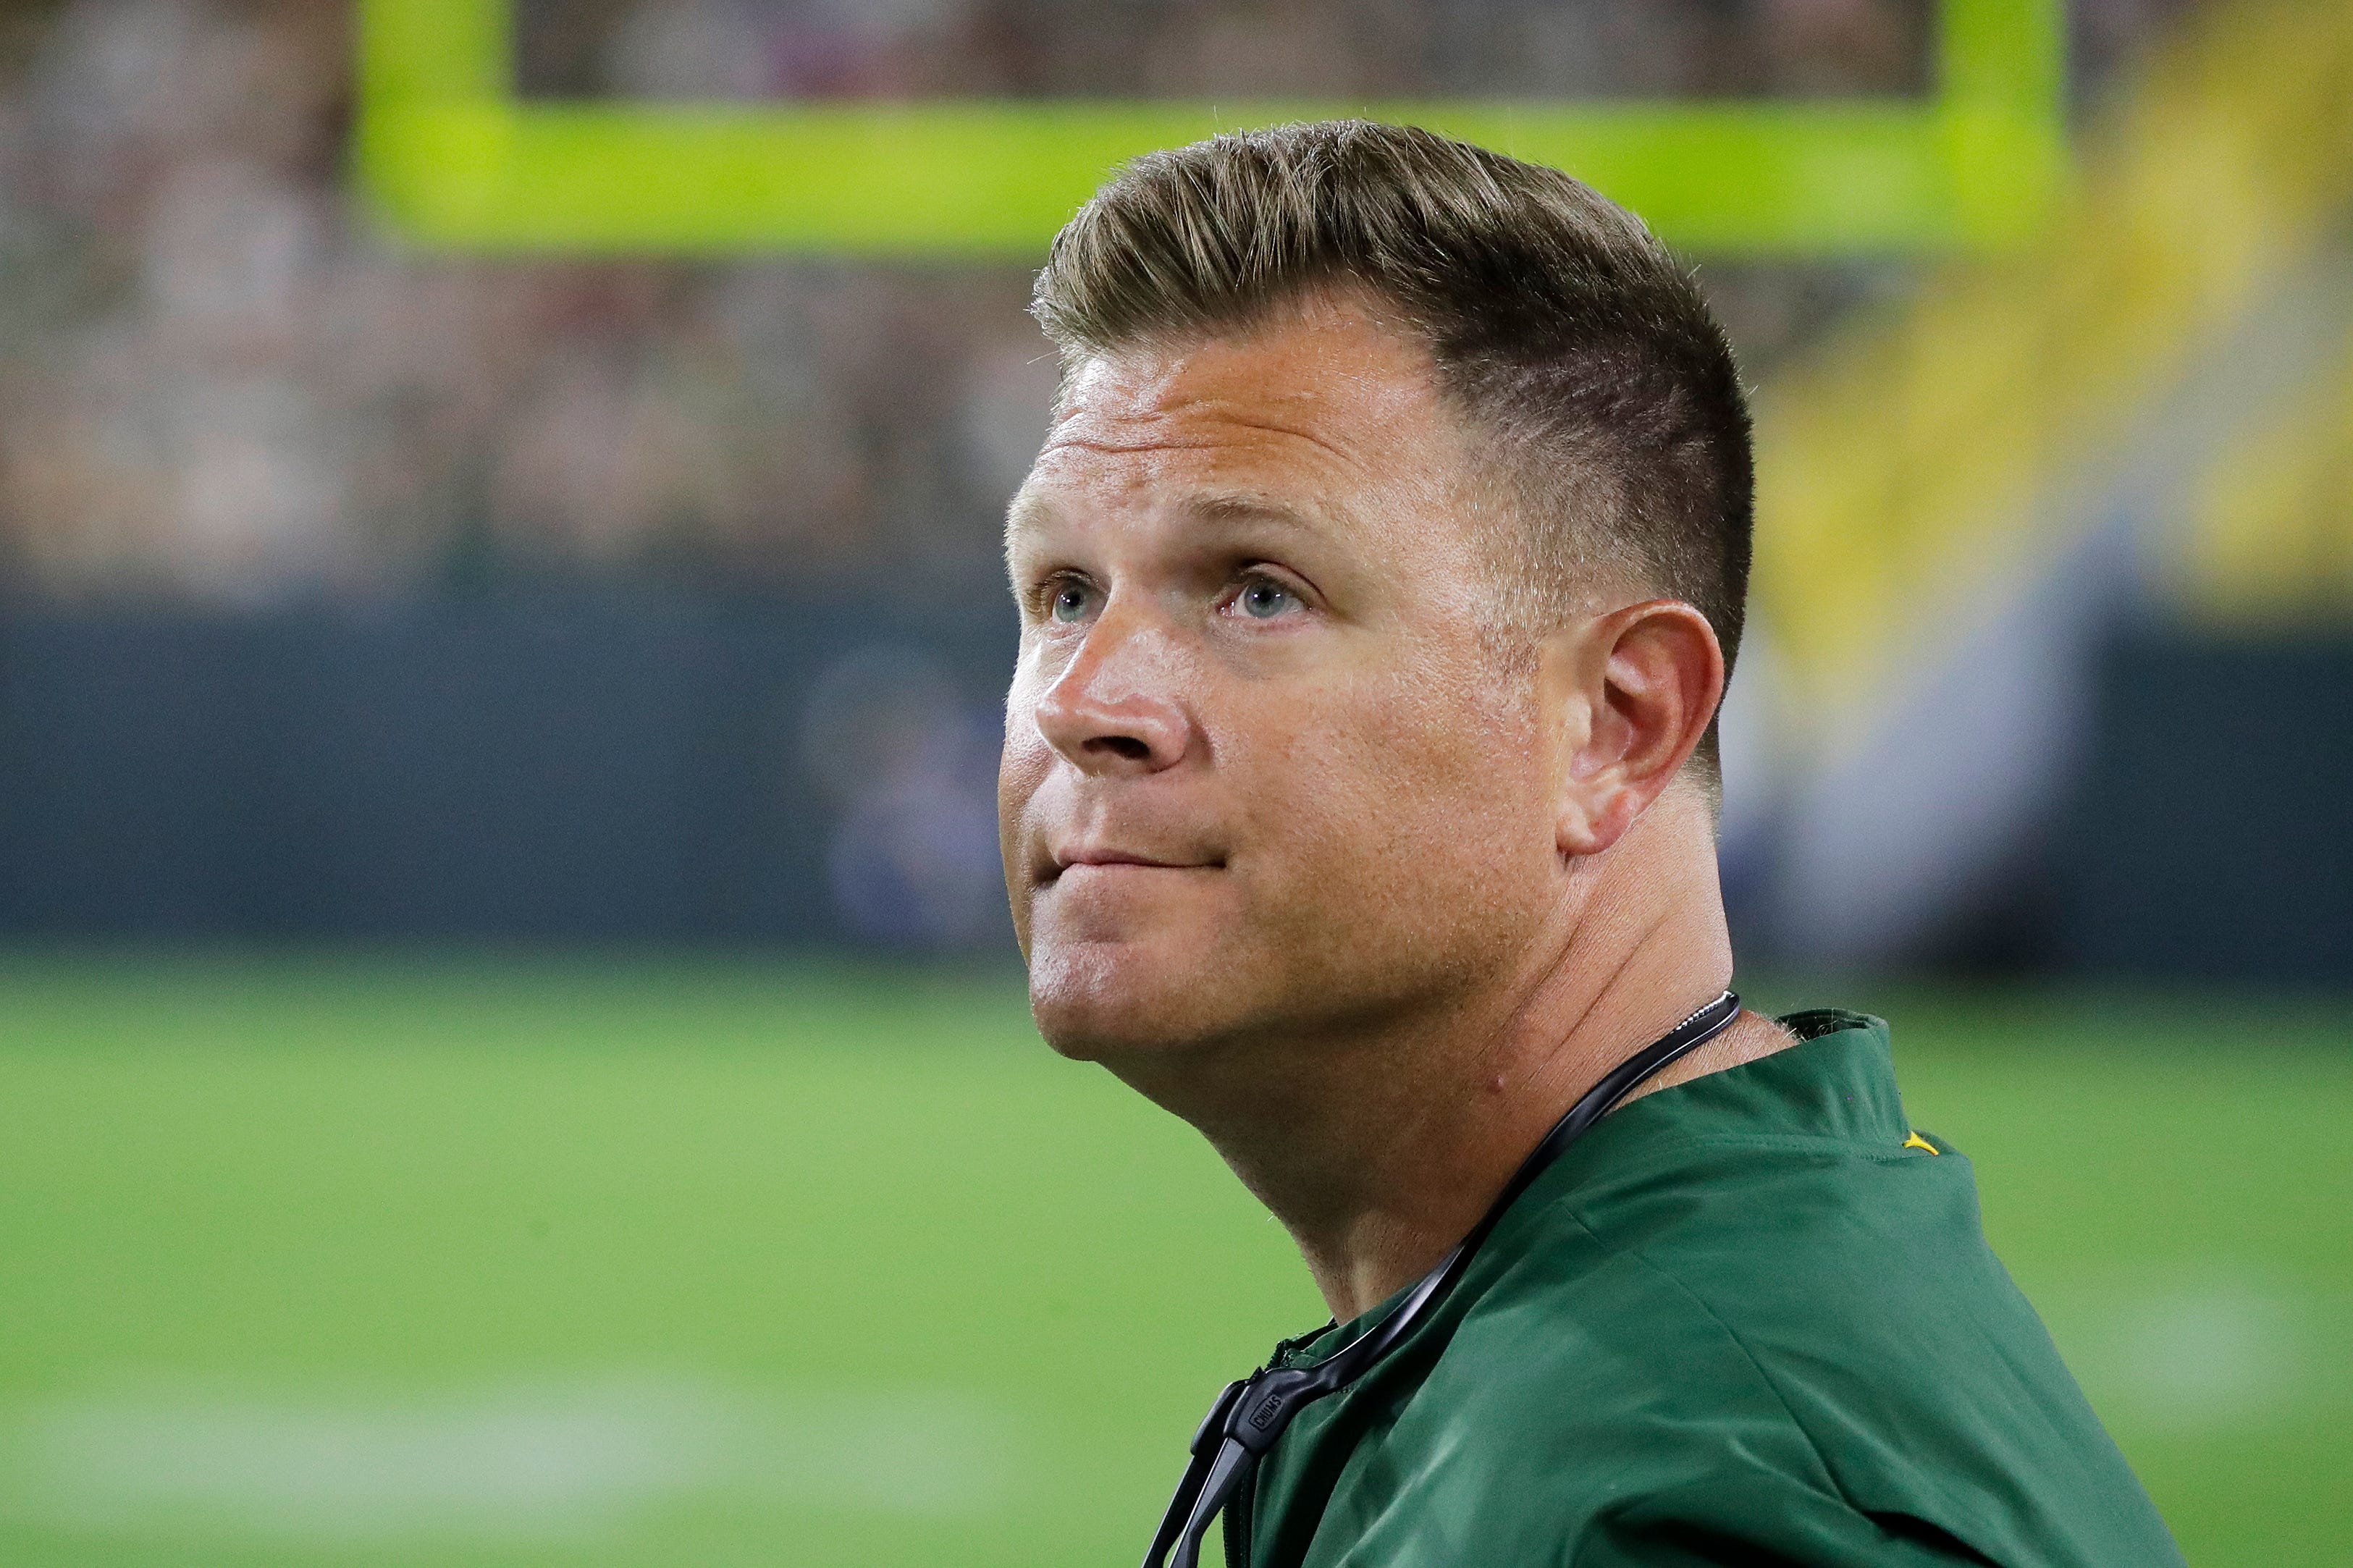 Green Bay Packers GM Brian Gutekunst watches from the sideline during an NFL preseason game at Lambeau Field on Thursday, August 9, 2018 in Green Bay, Wis. 
Adam Wesley/USA TODAY NETWORK-Wisconsin